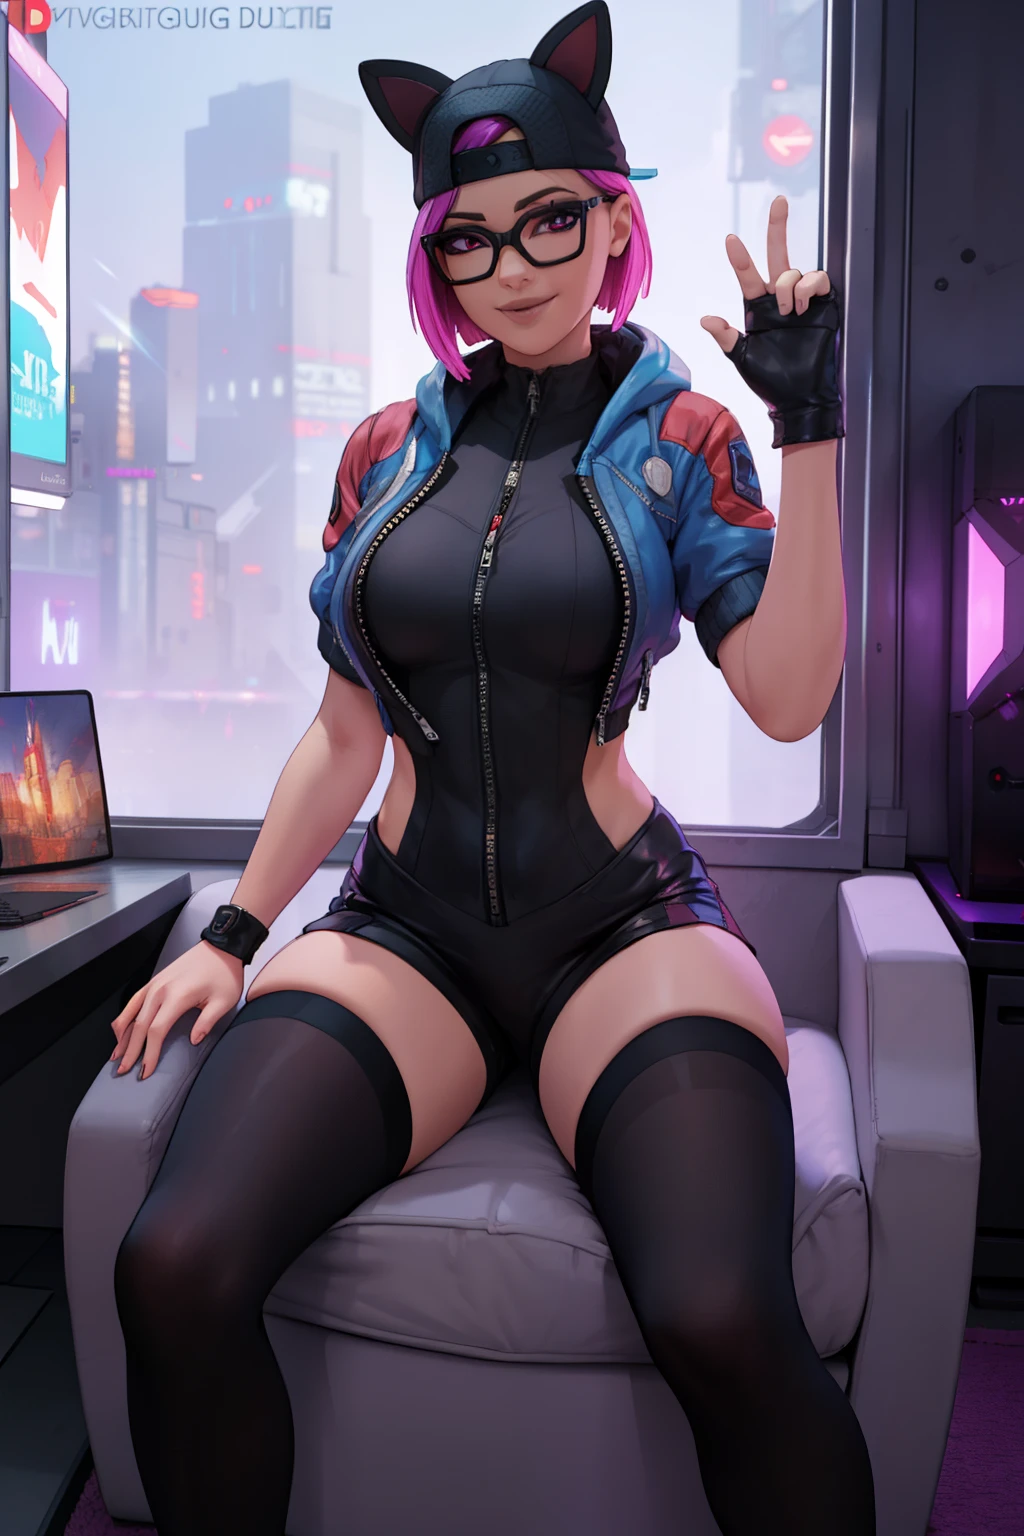 (masterpiece), (best quality),Gamer chair (solo), looking the viewer, cyberpunk, high detailed,extremely detailed,shorts,long white thigh high socks, jacket, fine eyes, smile,dynamic pose, short pink hair,cap,fingerless glove,glasses.